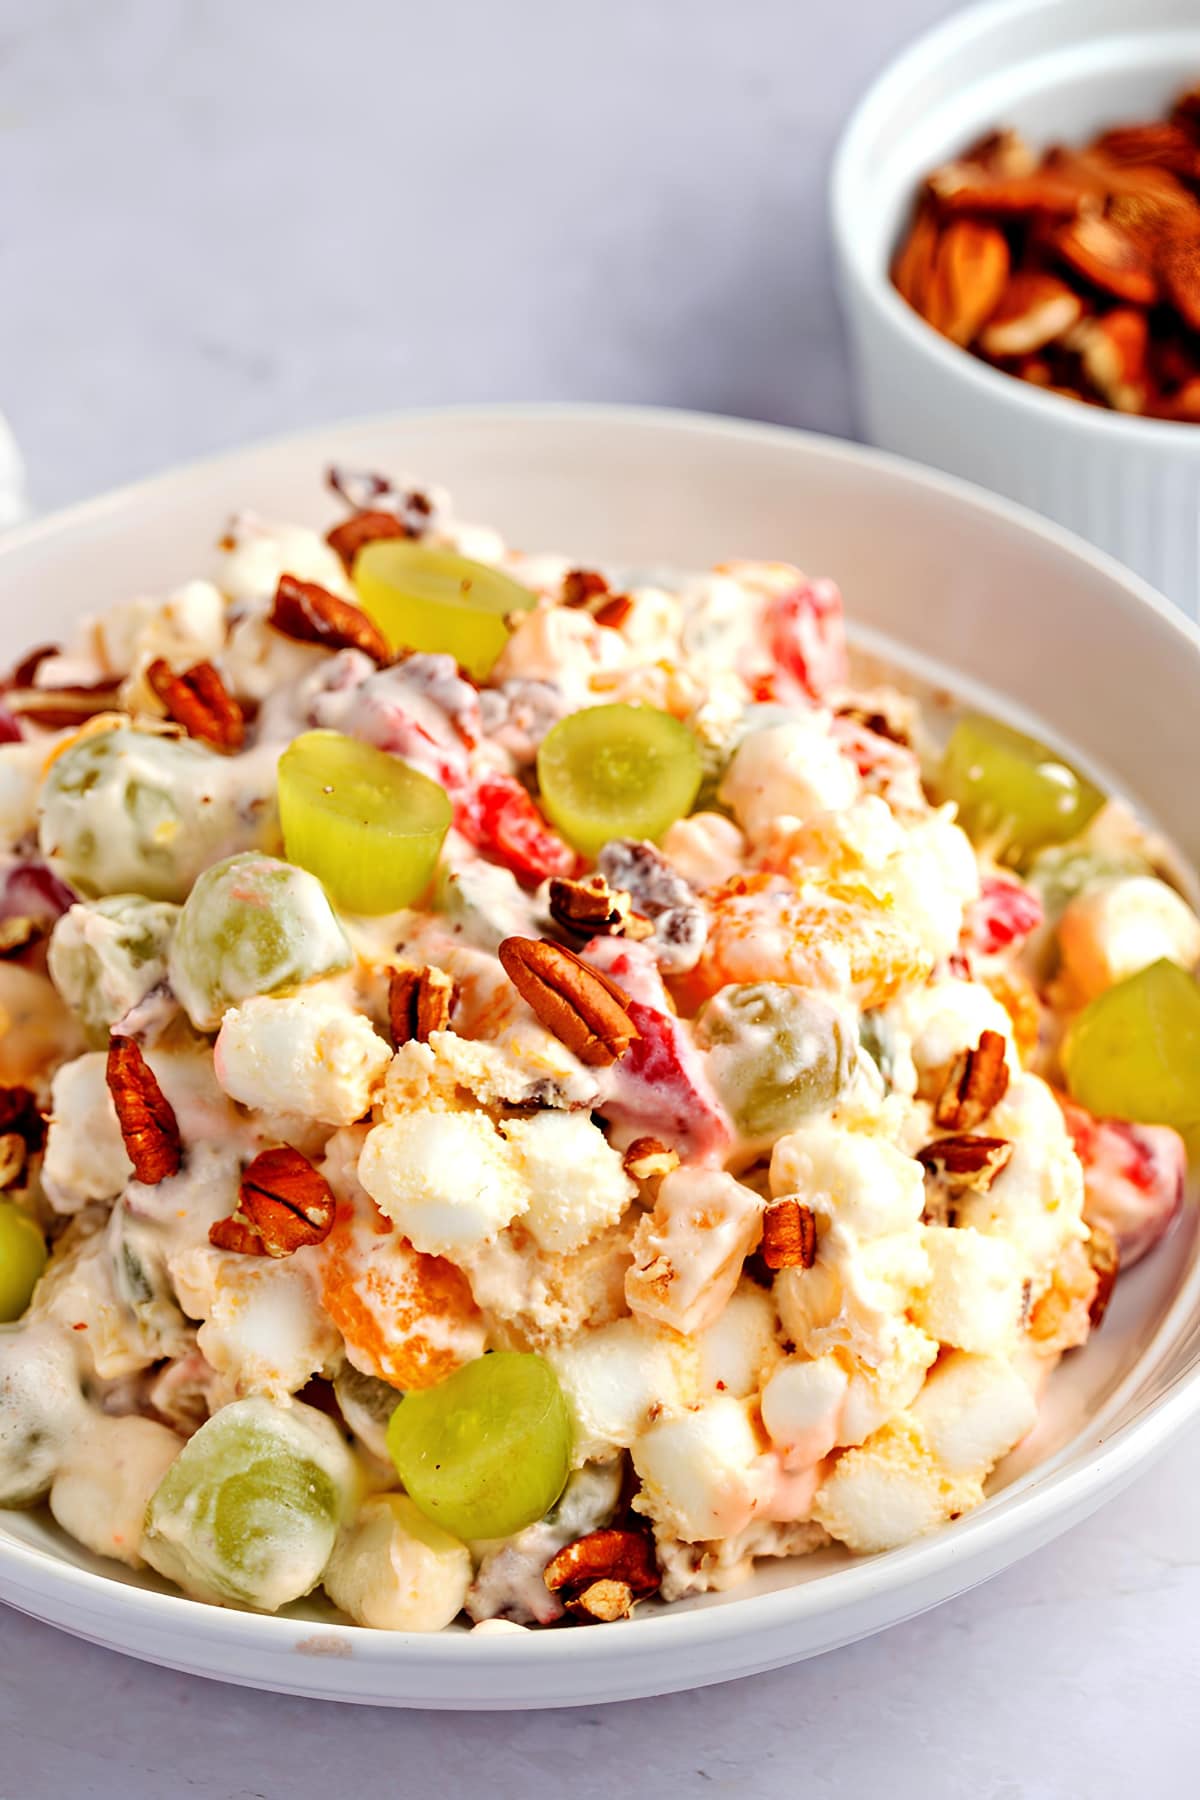 Colorful Christmas Fruit Salad with Grapes, Cherries, Mini-Marshmallows and Pecan Nuts